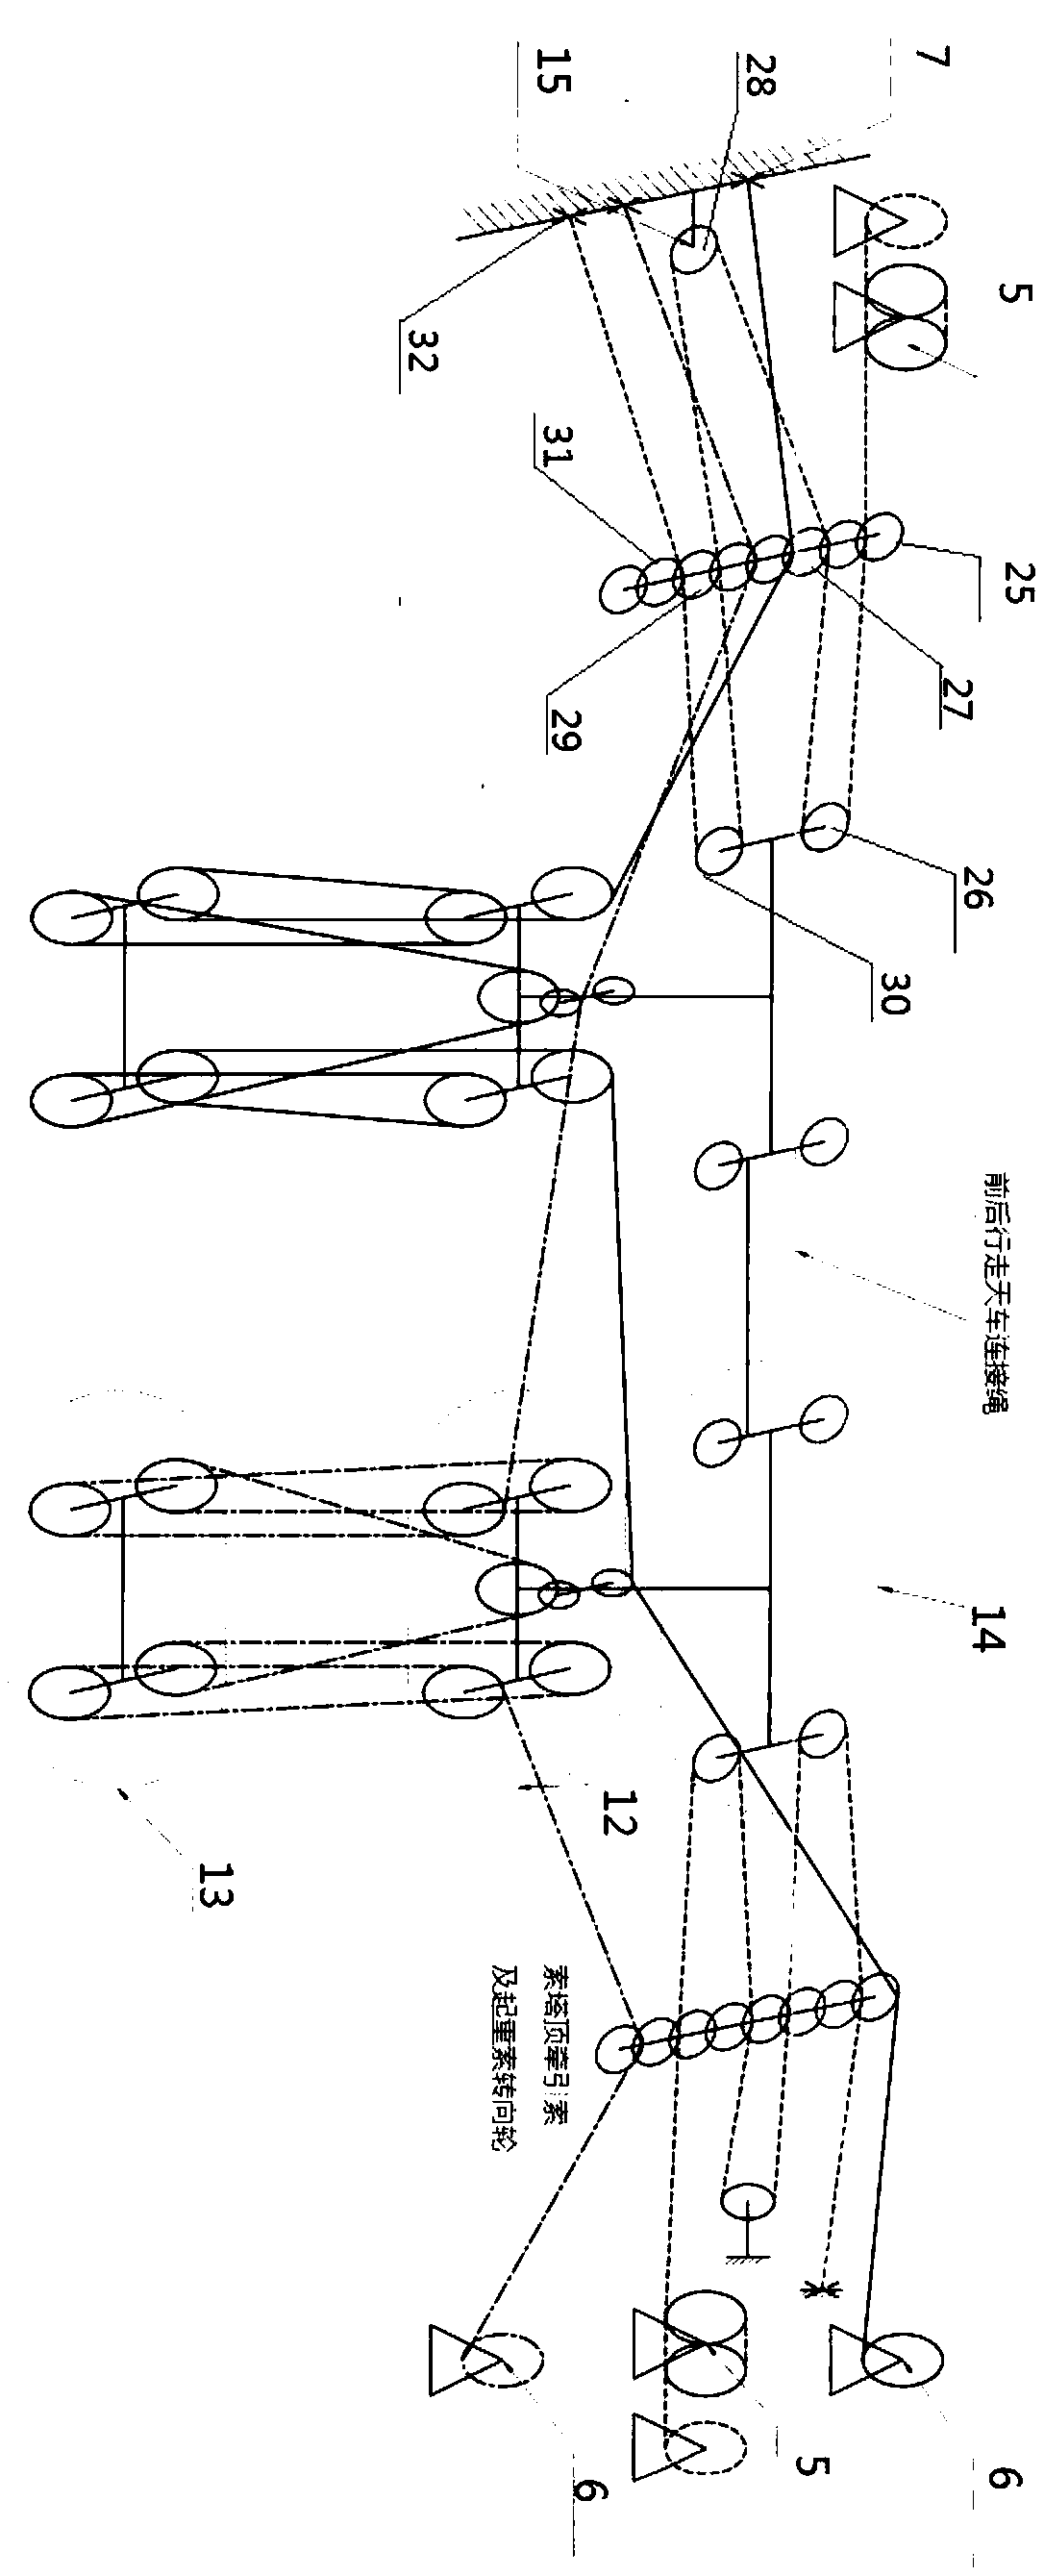 Method for cable hoisting construction of large-span suspension bridge stiffening beams